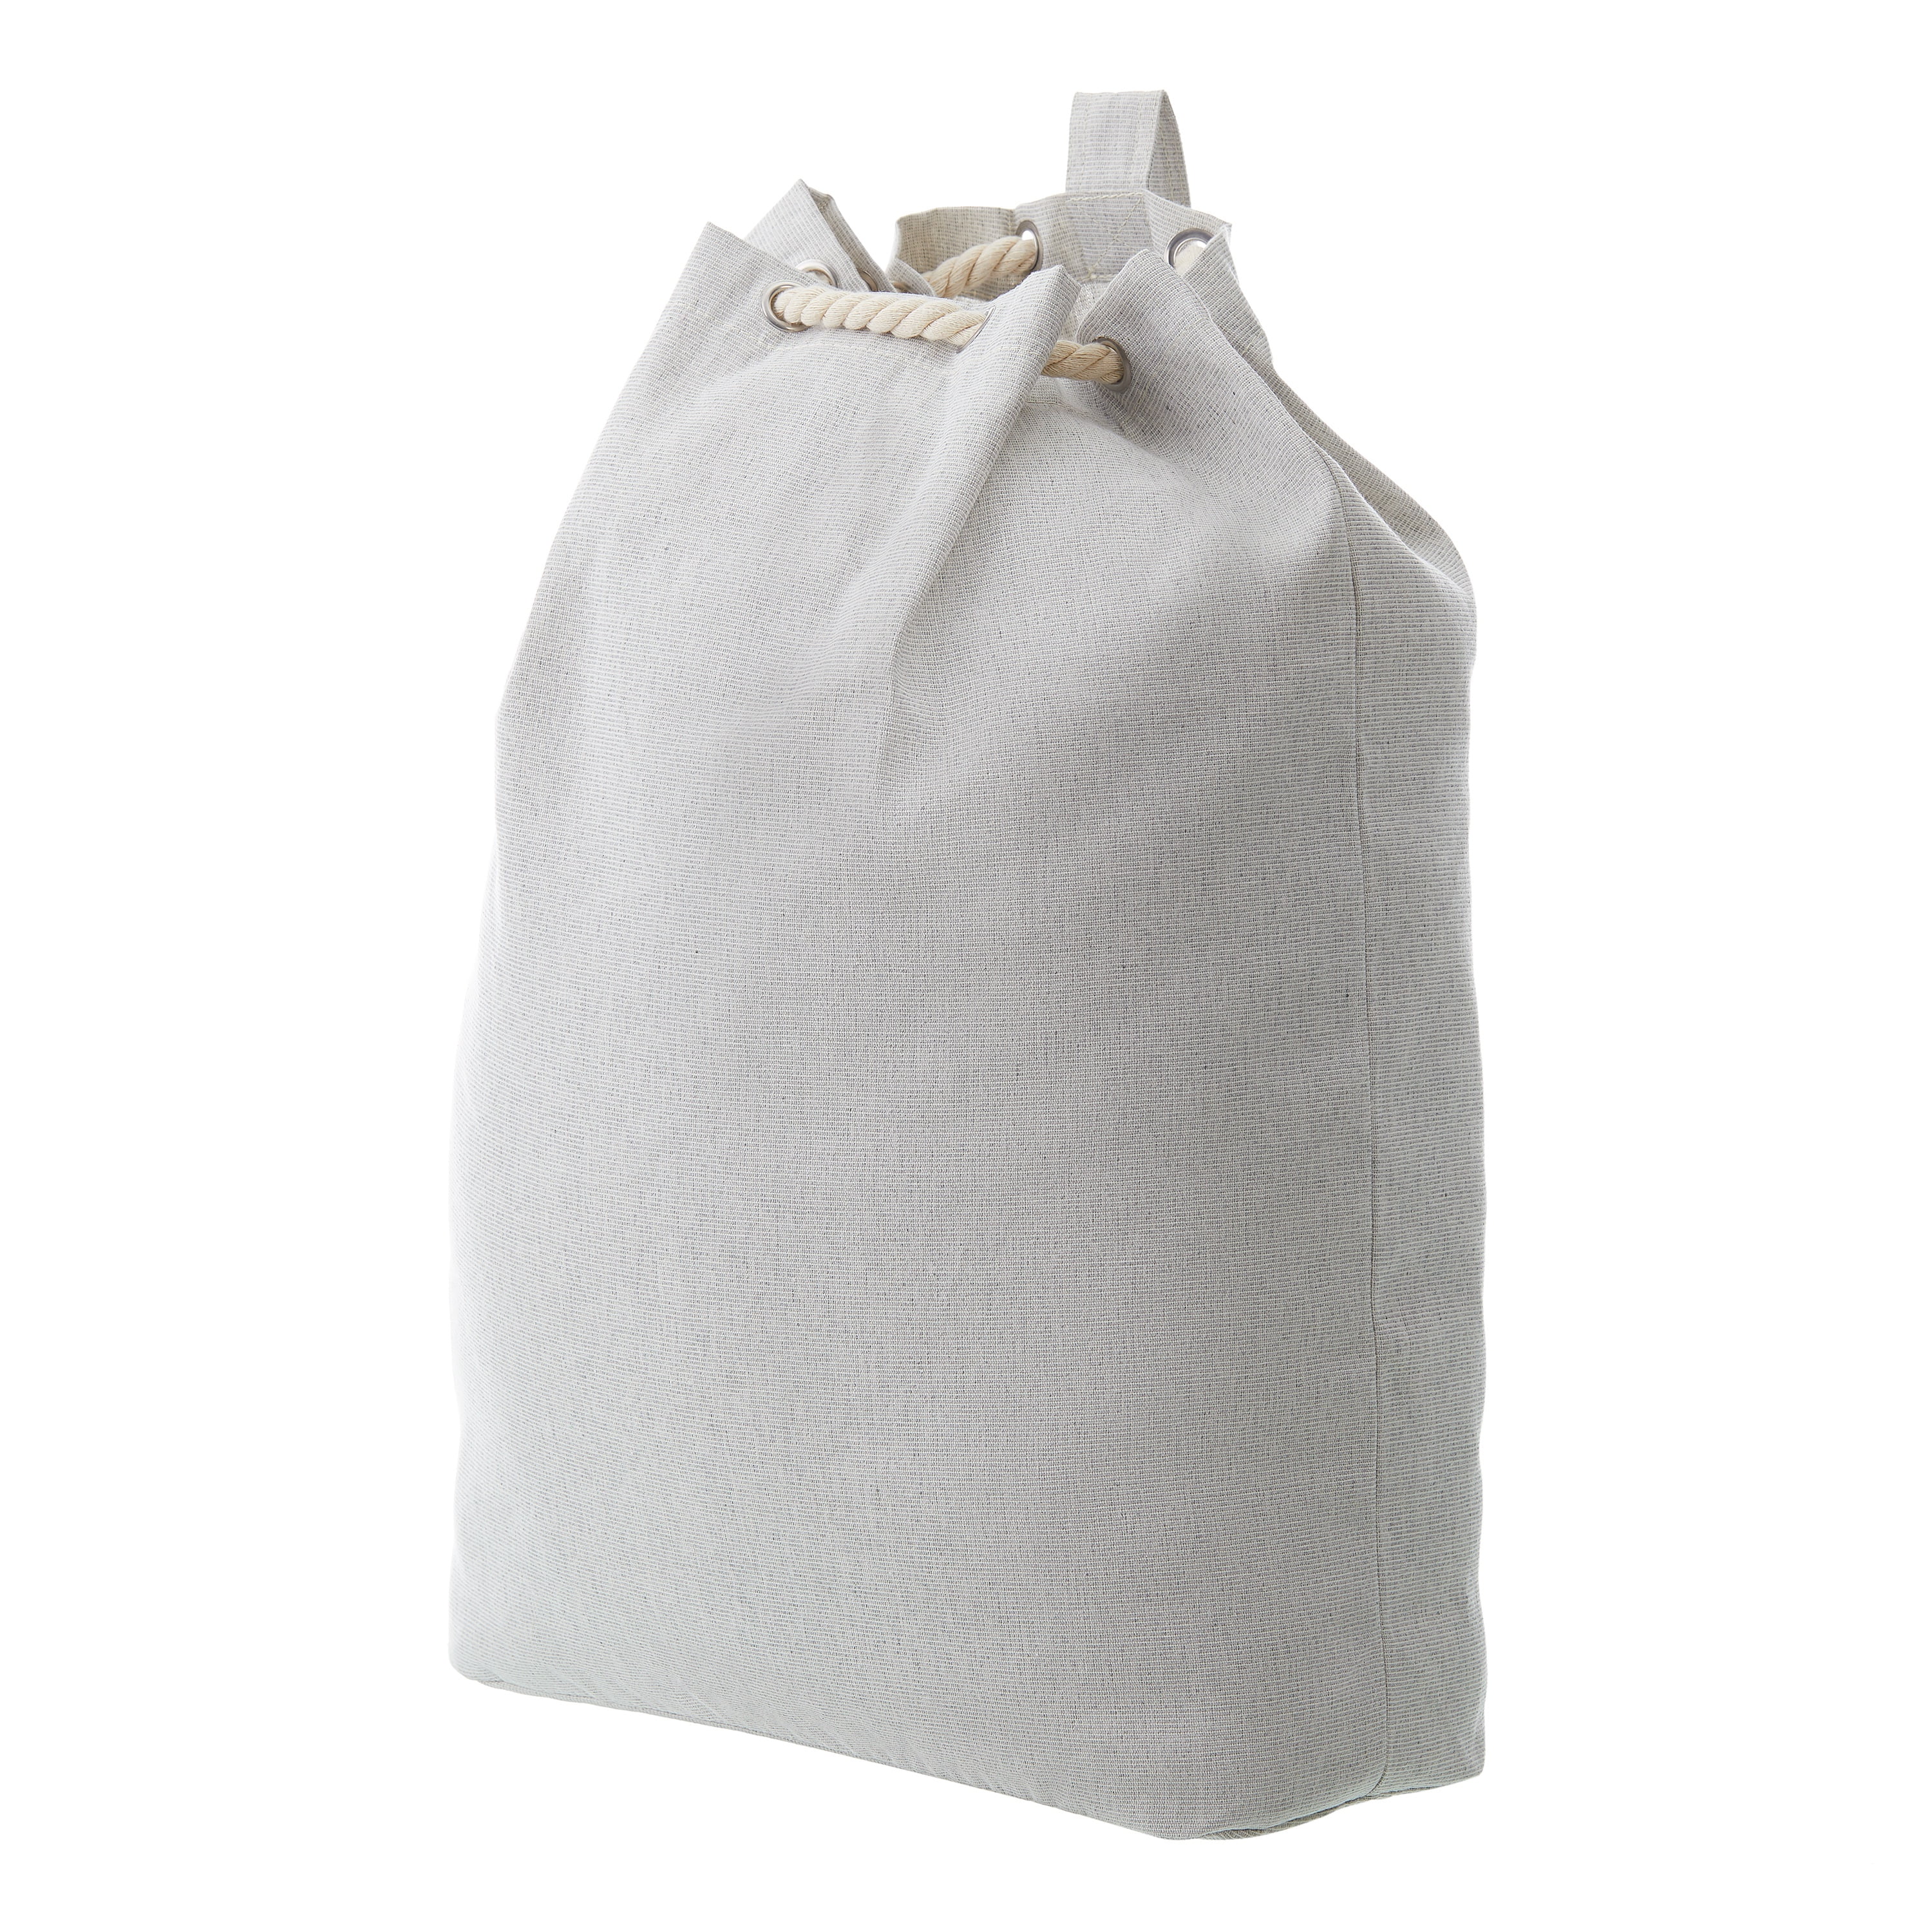 Mainstays Polyester & Cotton Laundry Bag - Gray - 1 Each